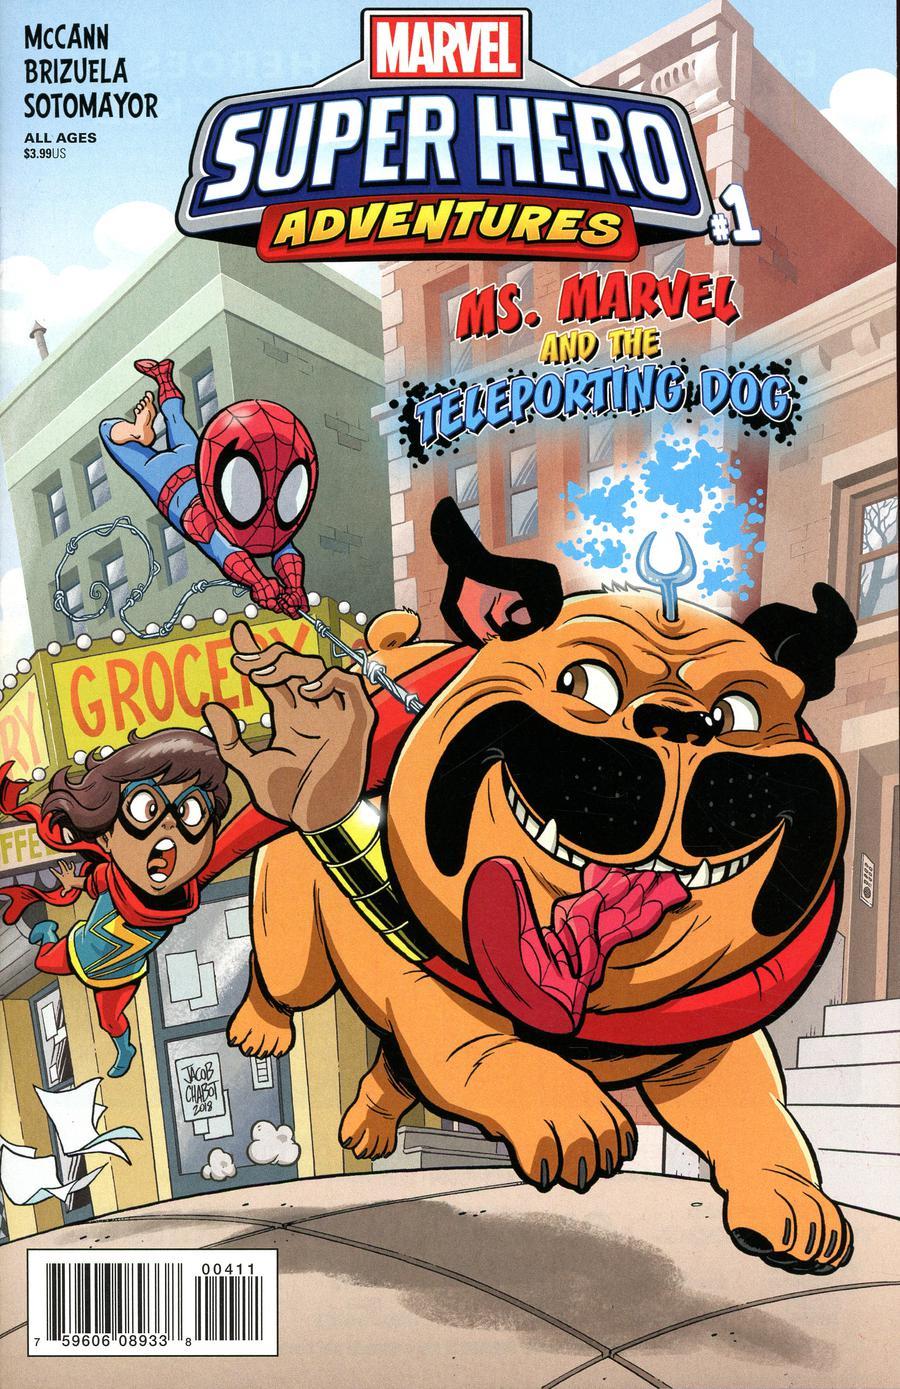 Marvel Super Hero Adventures Ms Marvel And The Teleporting Dog Vol. 1 #1